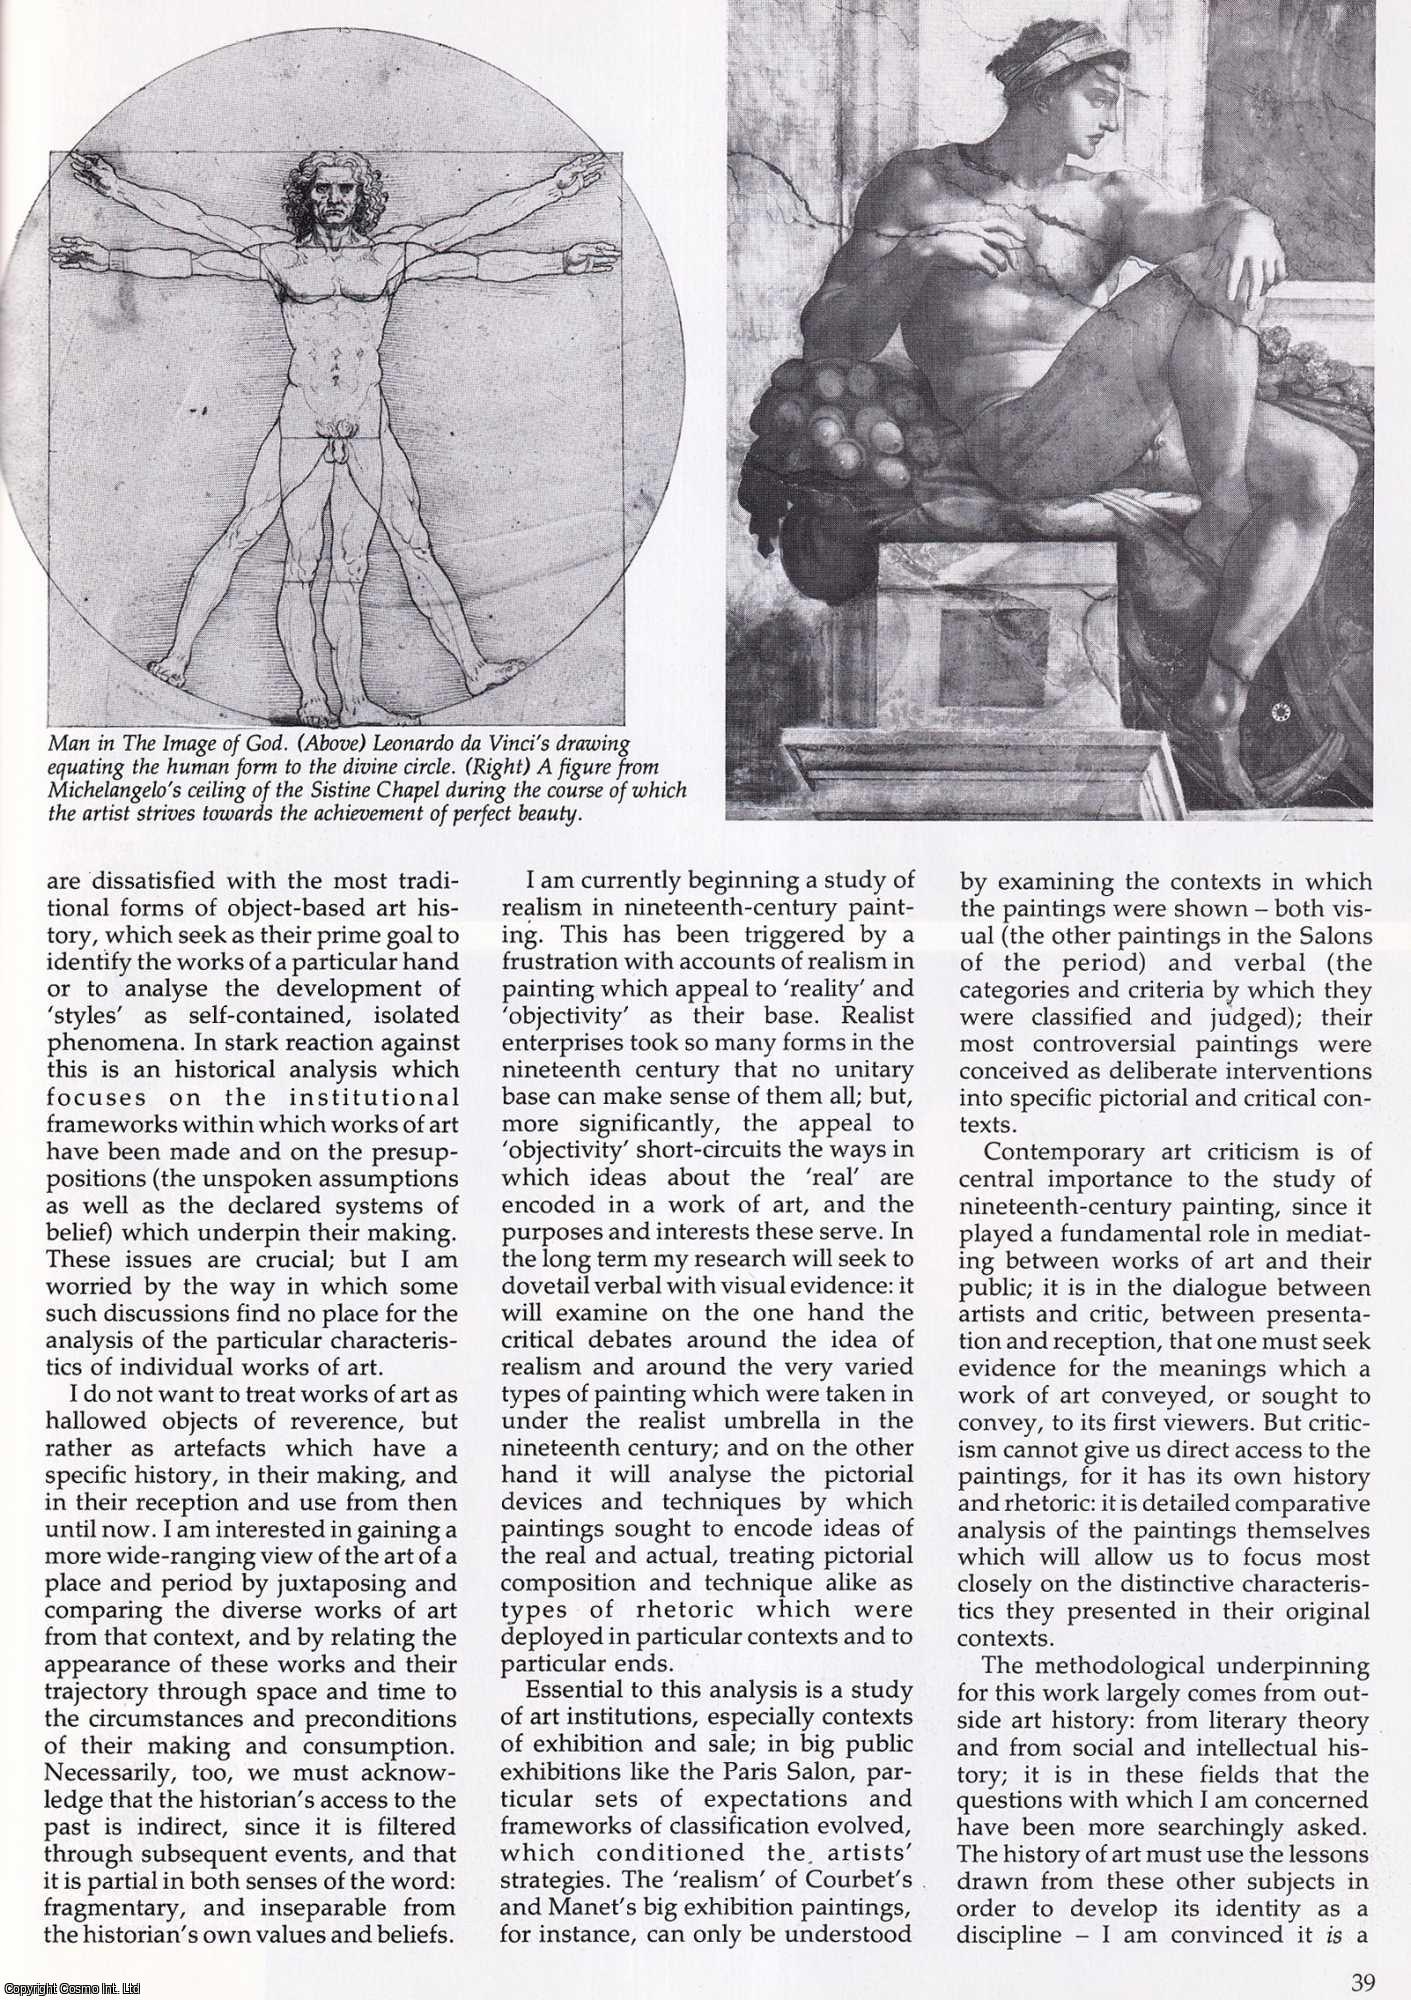 Alex Potts, John House and others - What is the History of Art? An original article from History Today, 1985.